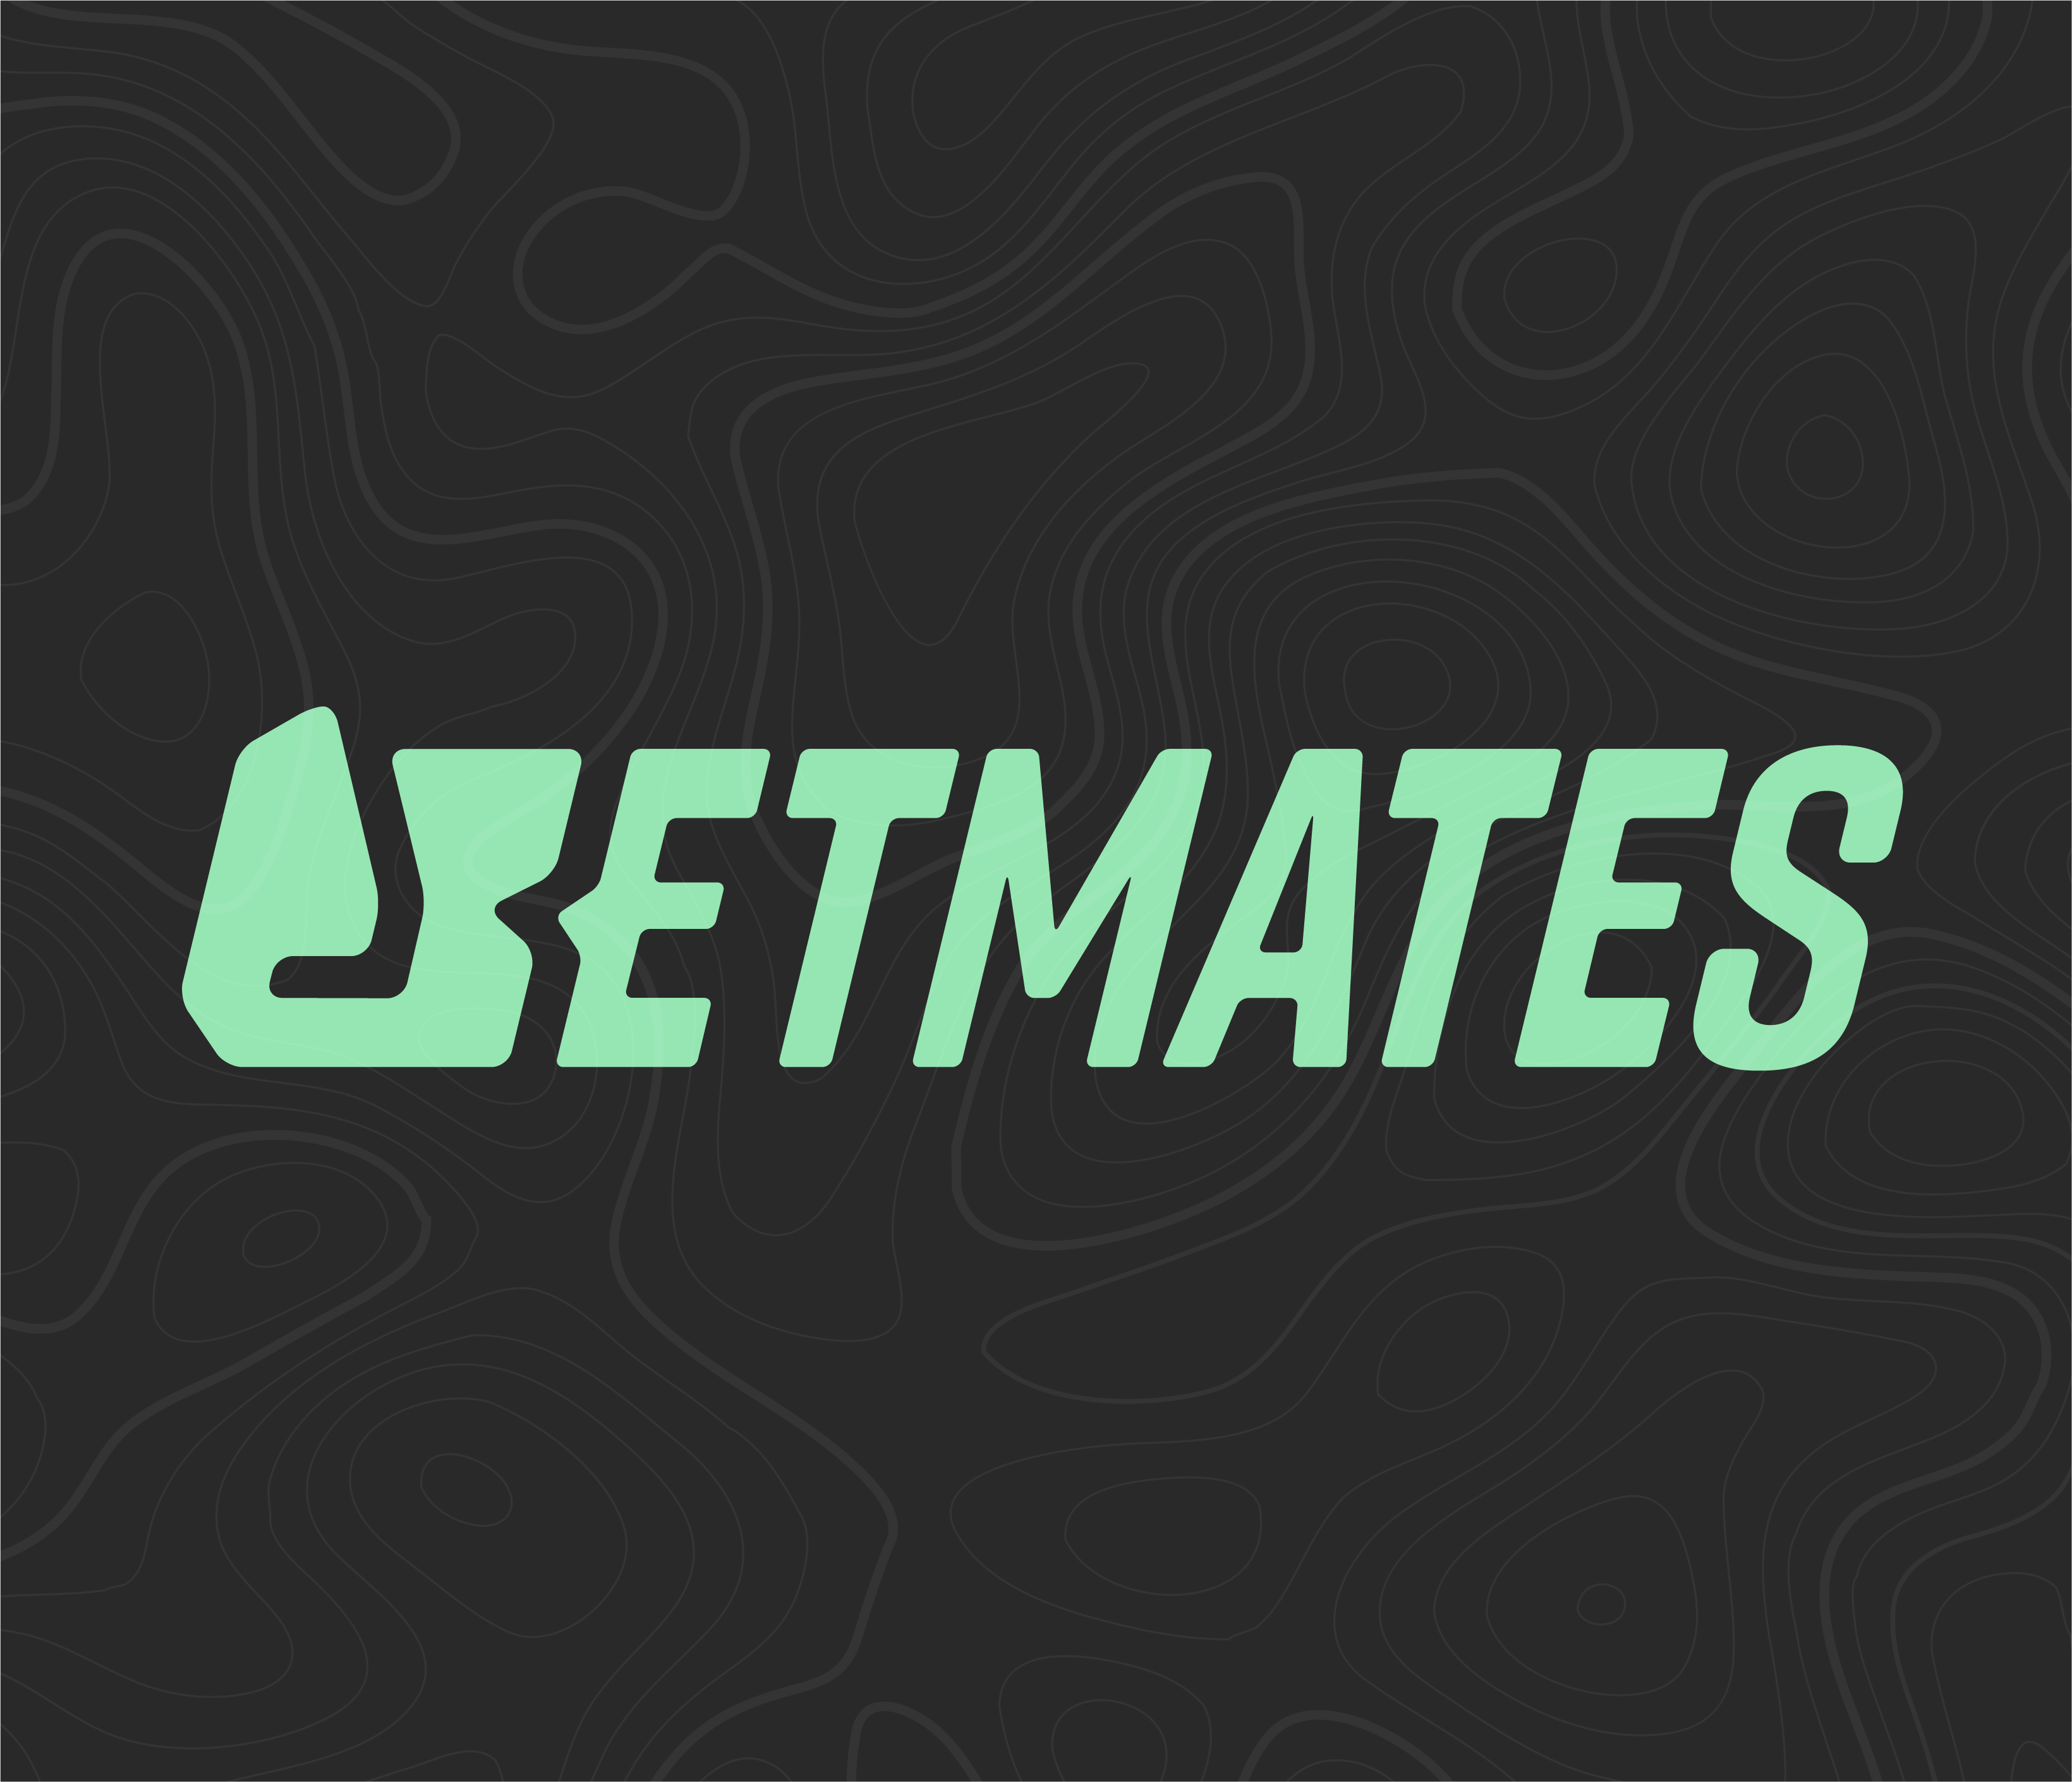 Betmates logo with topography textured background